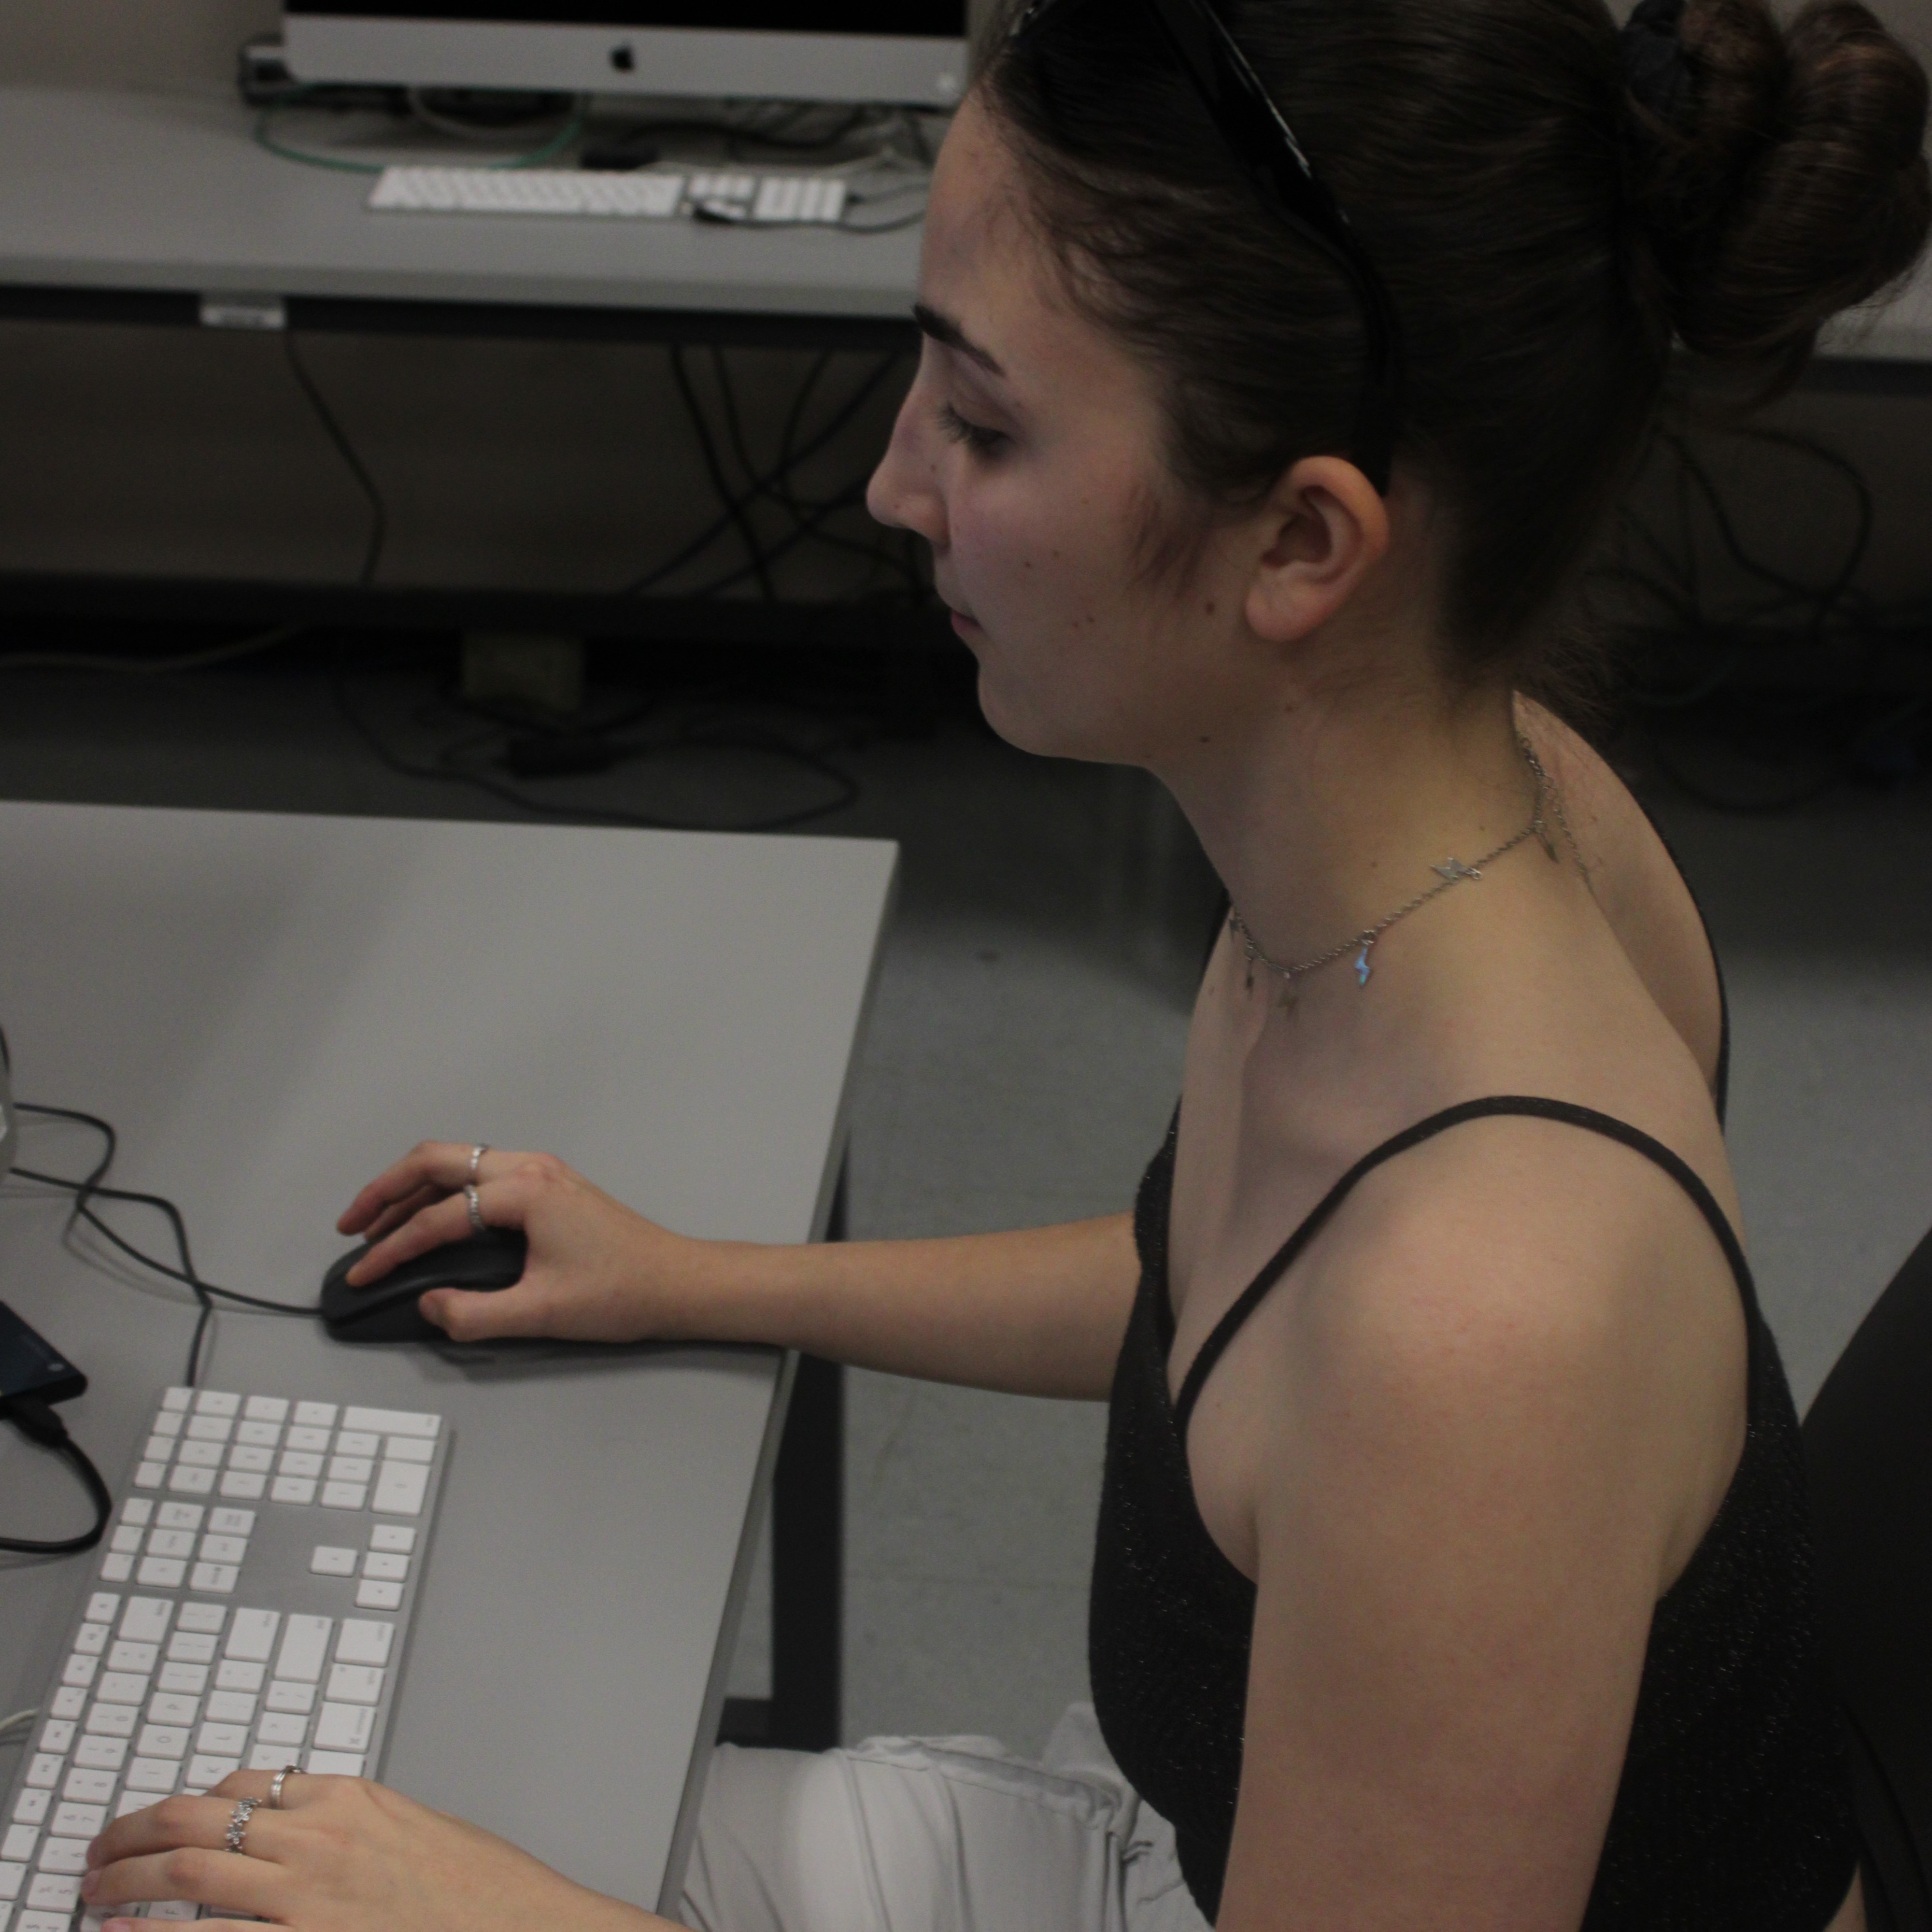 Adrianna working on editing for the video team.